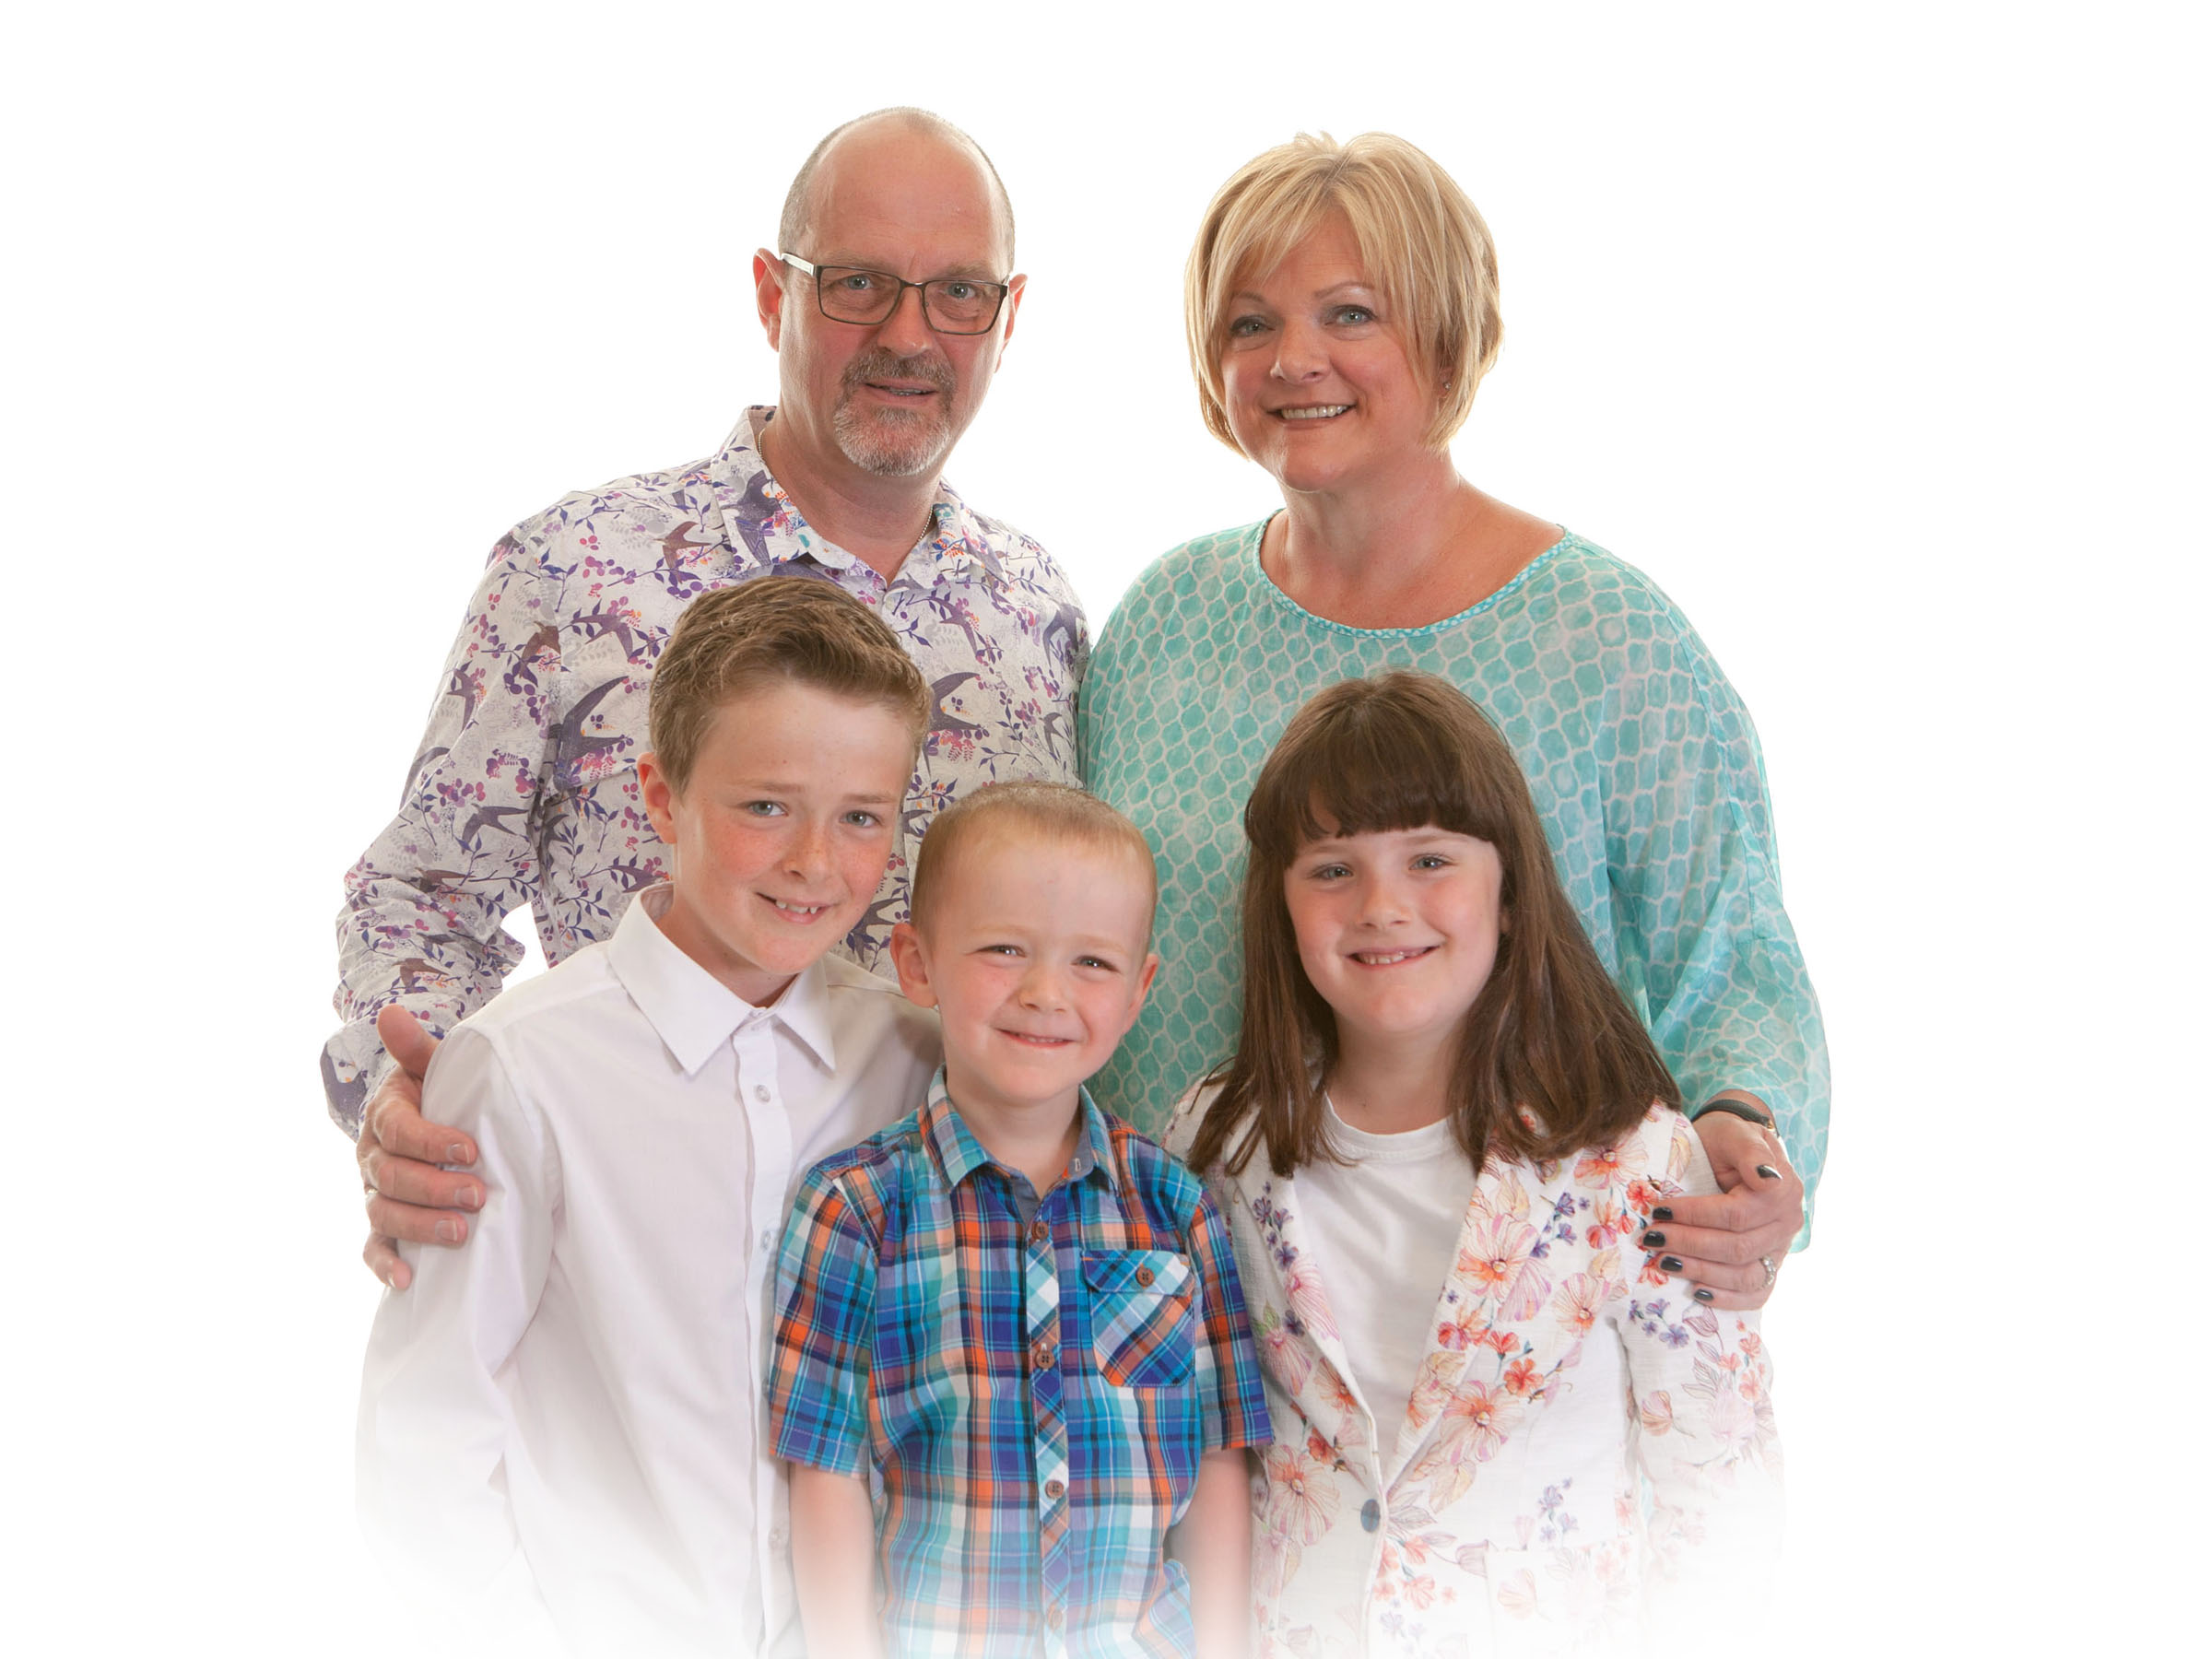 Contact North East Family Portrait Competition